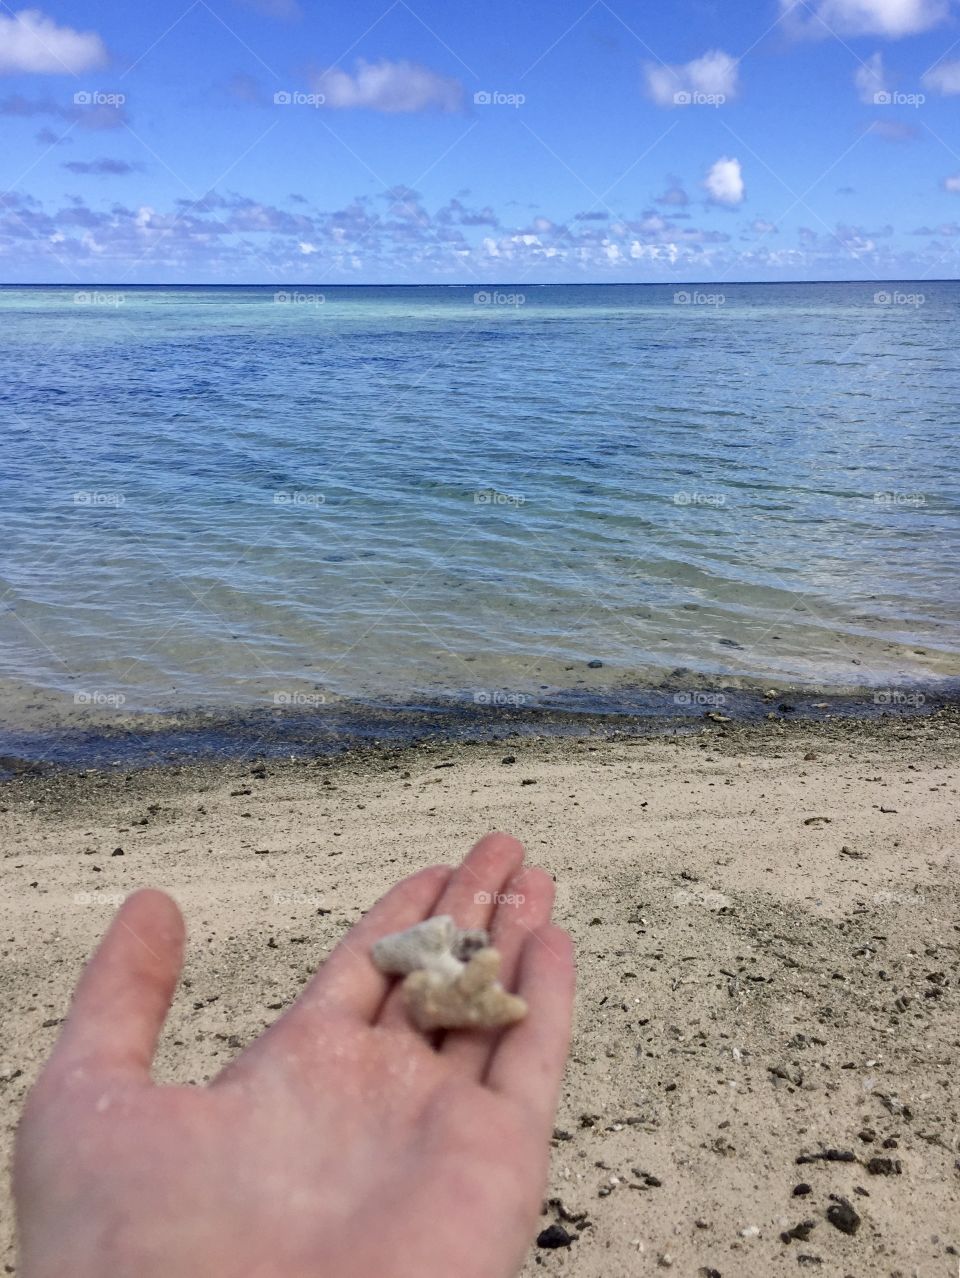 Looking out onto the sandy shore and ocean beyond with a hand holding pieces of coral in the foreground.